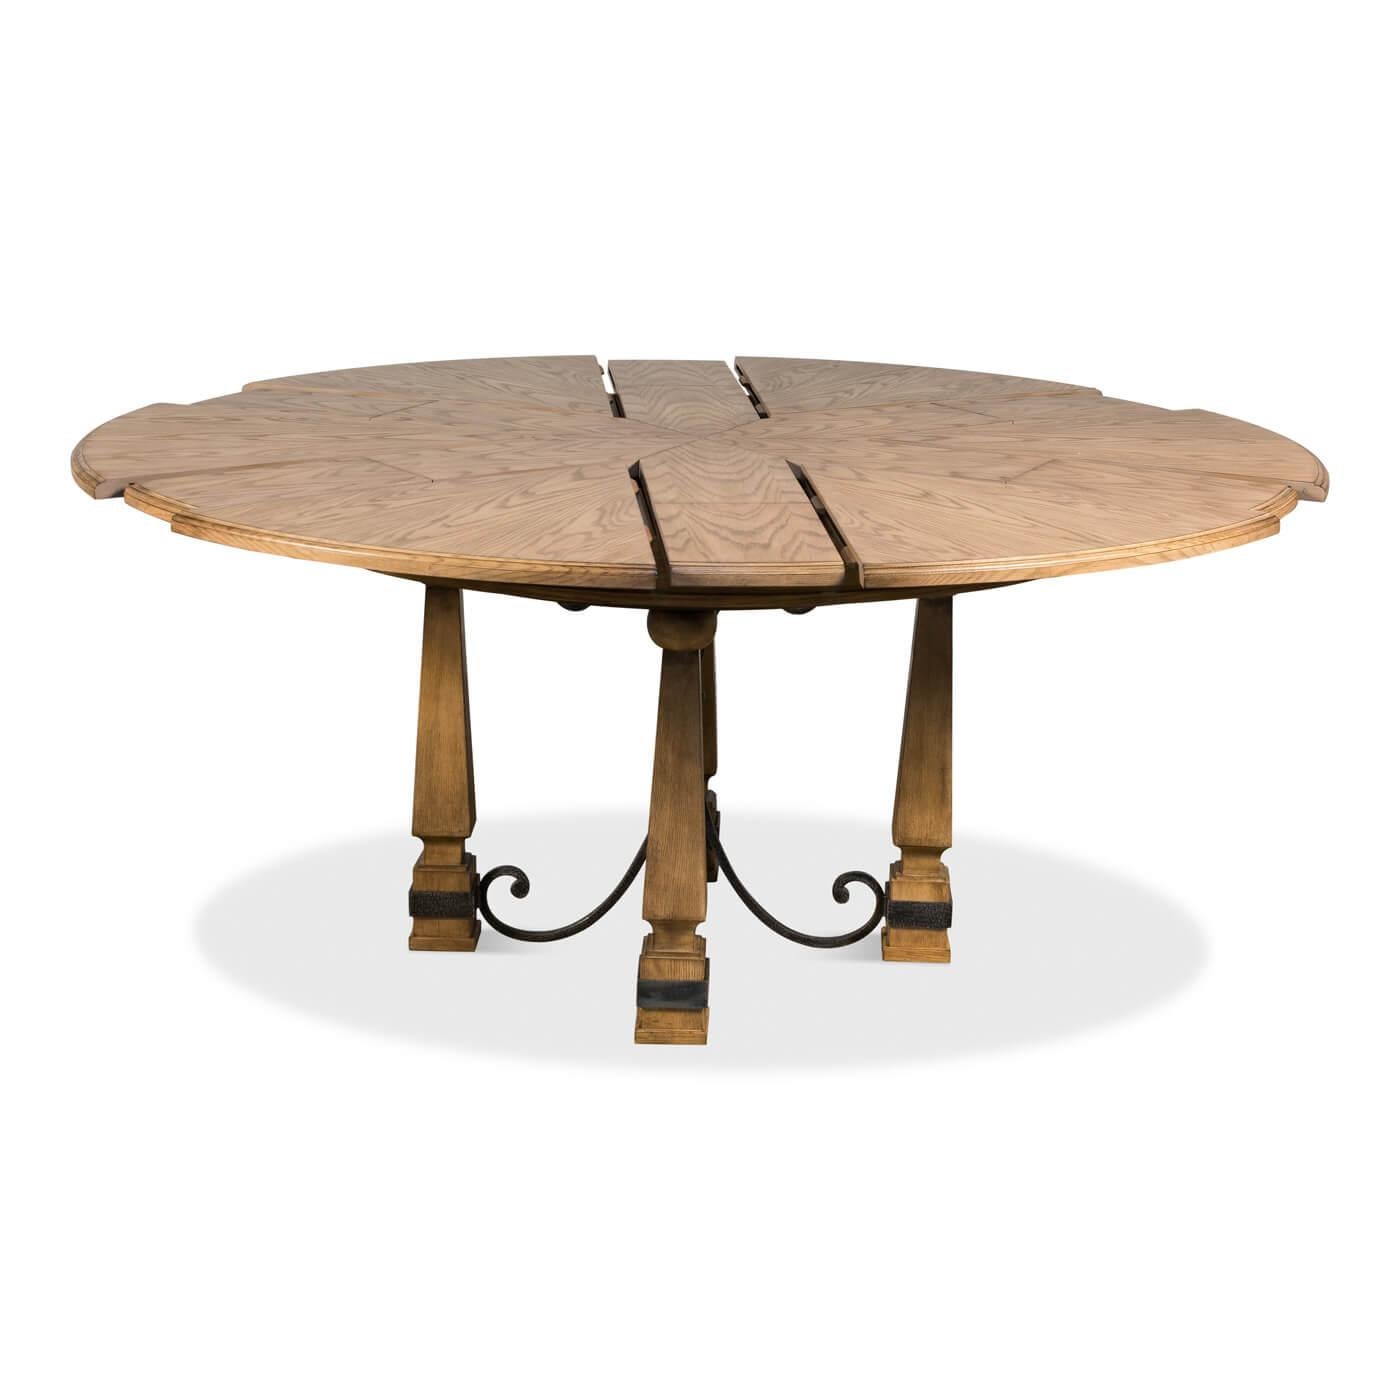 An Art & Crafts-style round dining table, this round extending dining table is crafted in oak and has scrolled iron accents at the base. 

Dimensions: 70